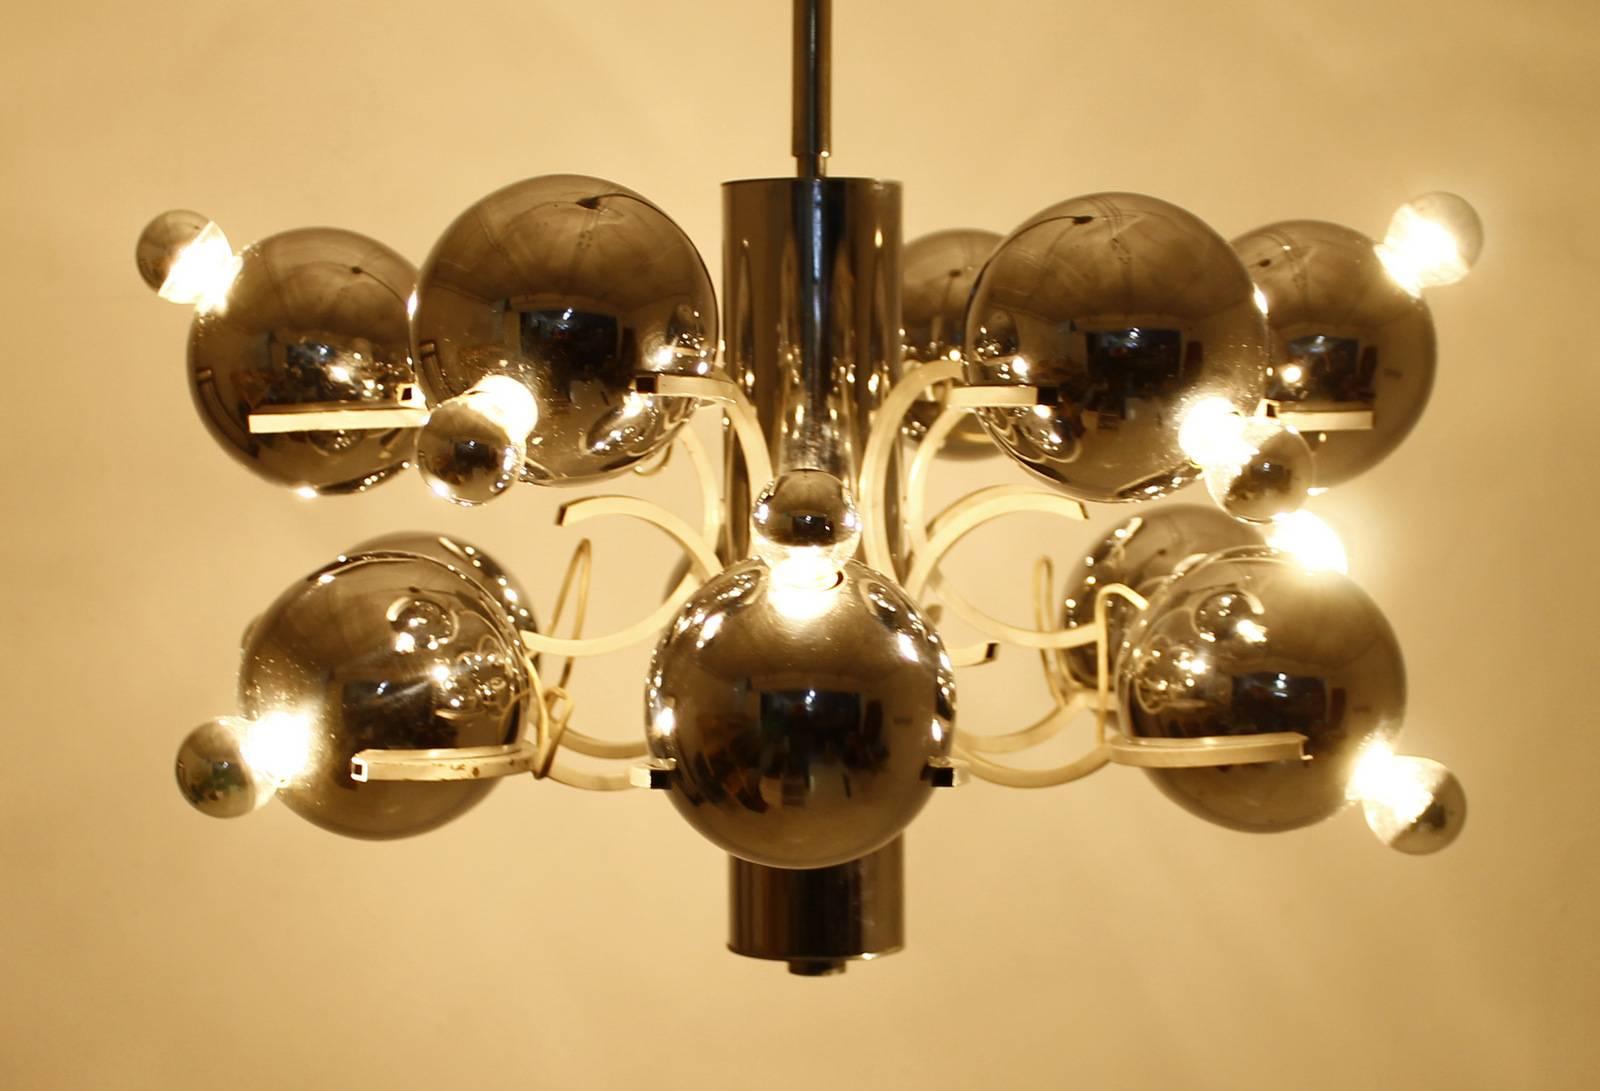 Beautiful chrome Sputnik from the 1960s, Italy. 12 chrome balls with 12 bulbs.
Good original condition!

Worldwide shipping.